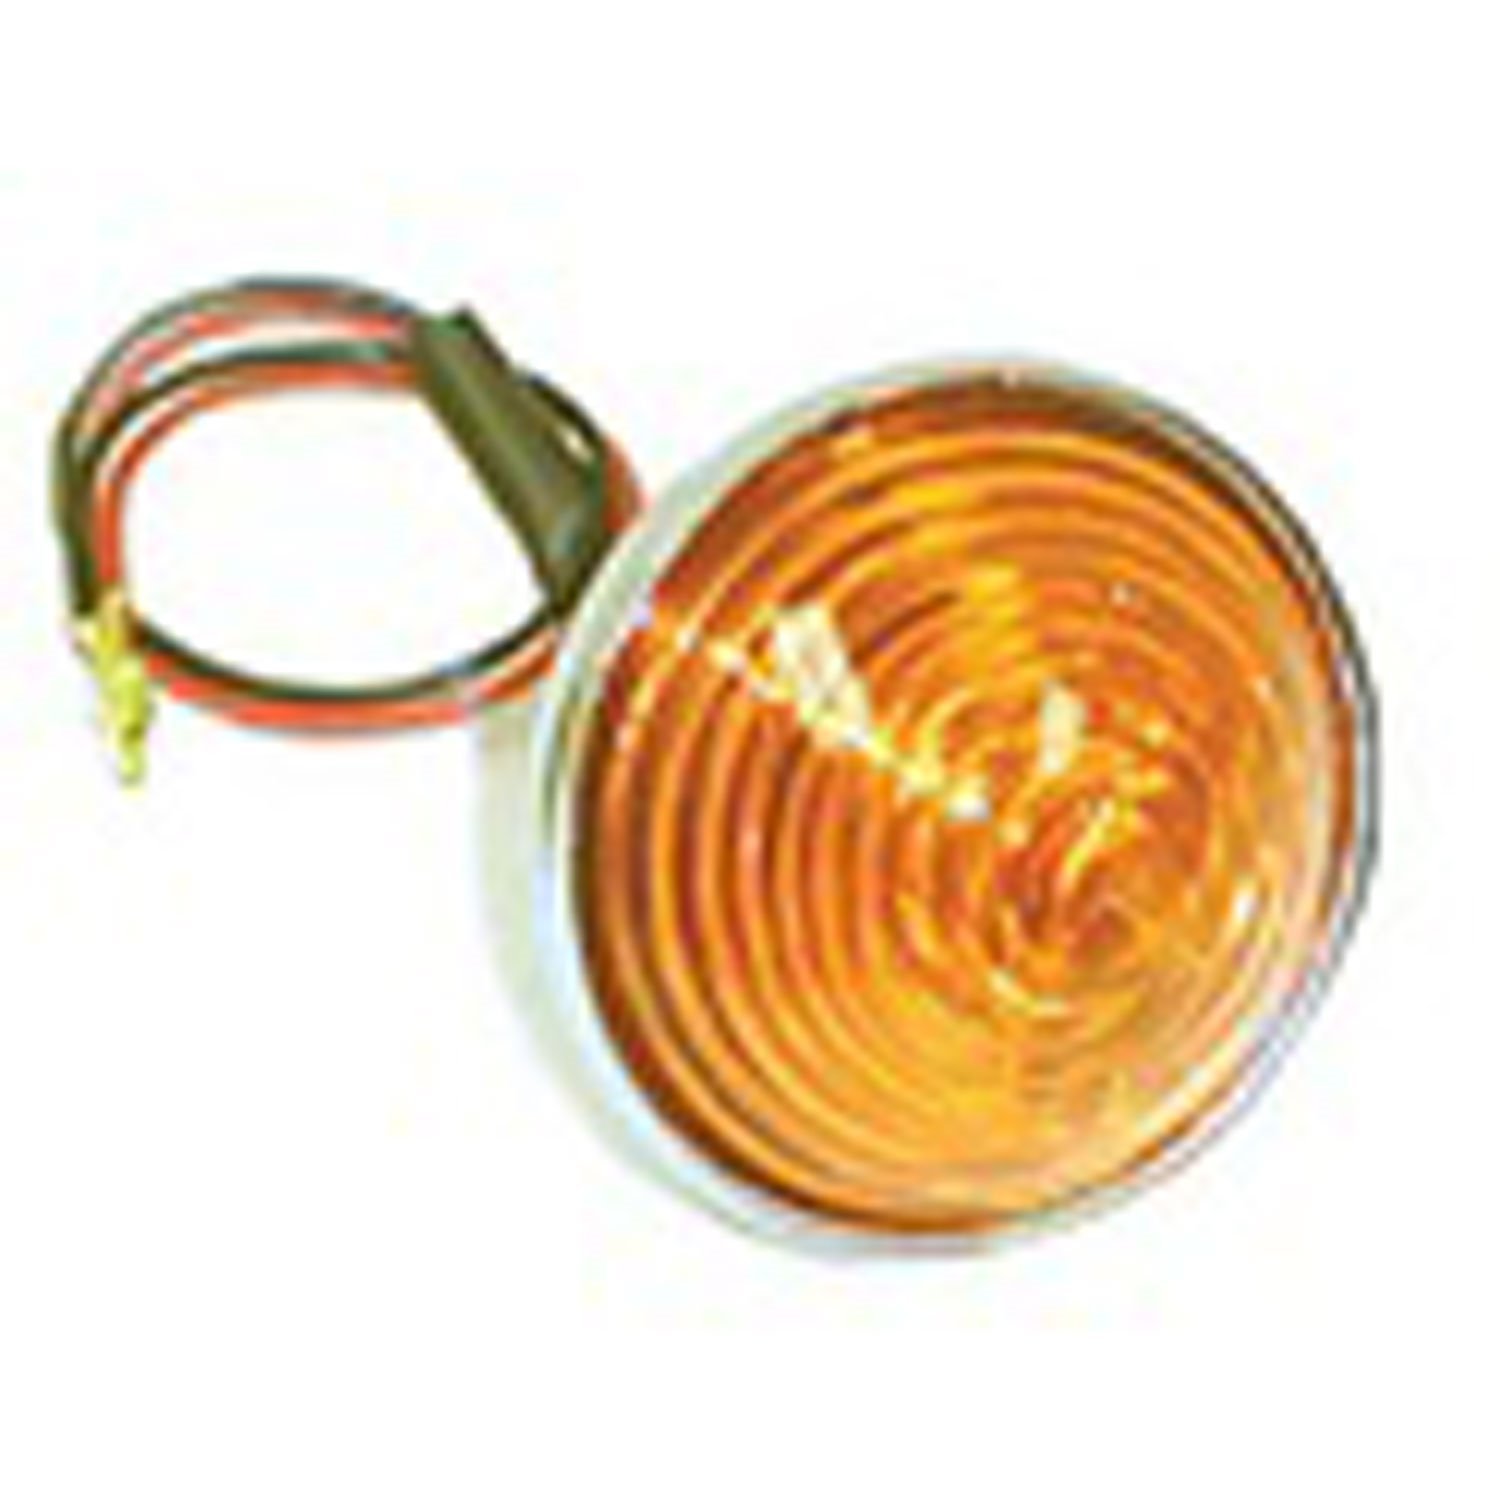 This amber turn signal parking light assembly from Omix-ADA fits 55-68 Willys CJ3B 55-57 Willys M-38